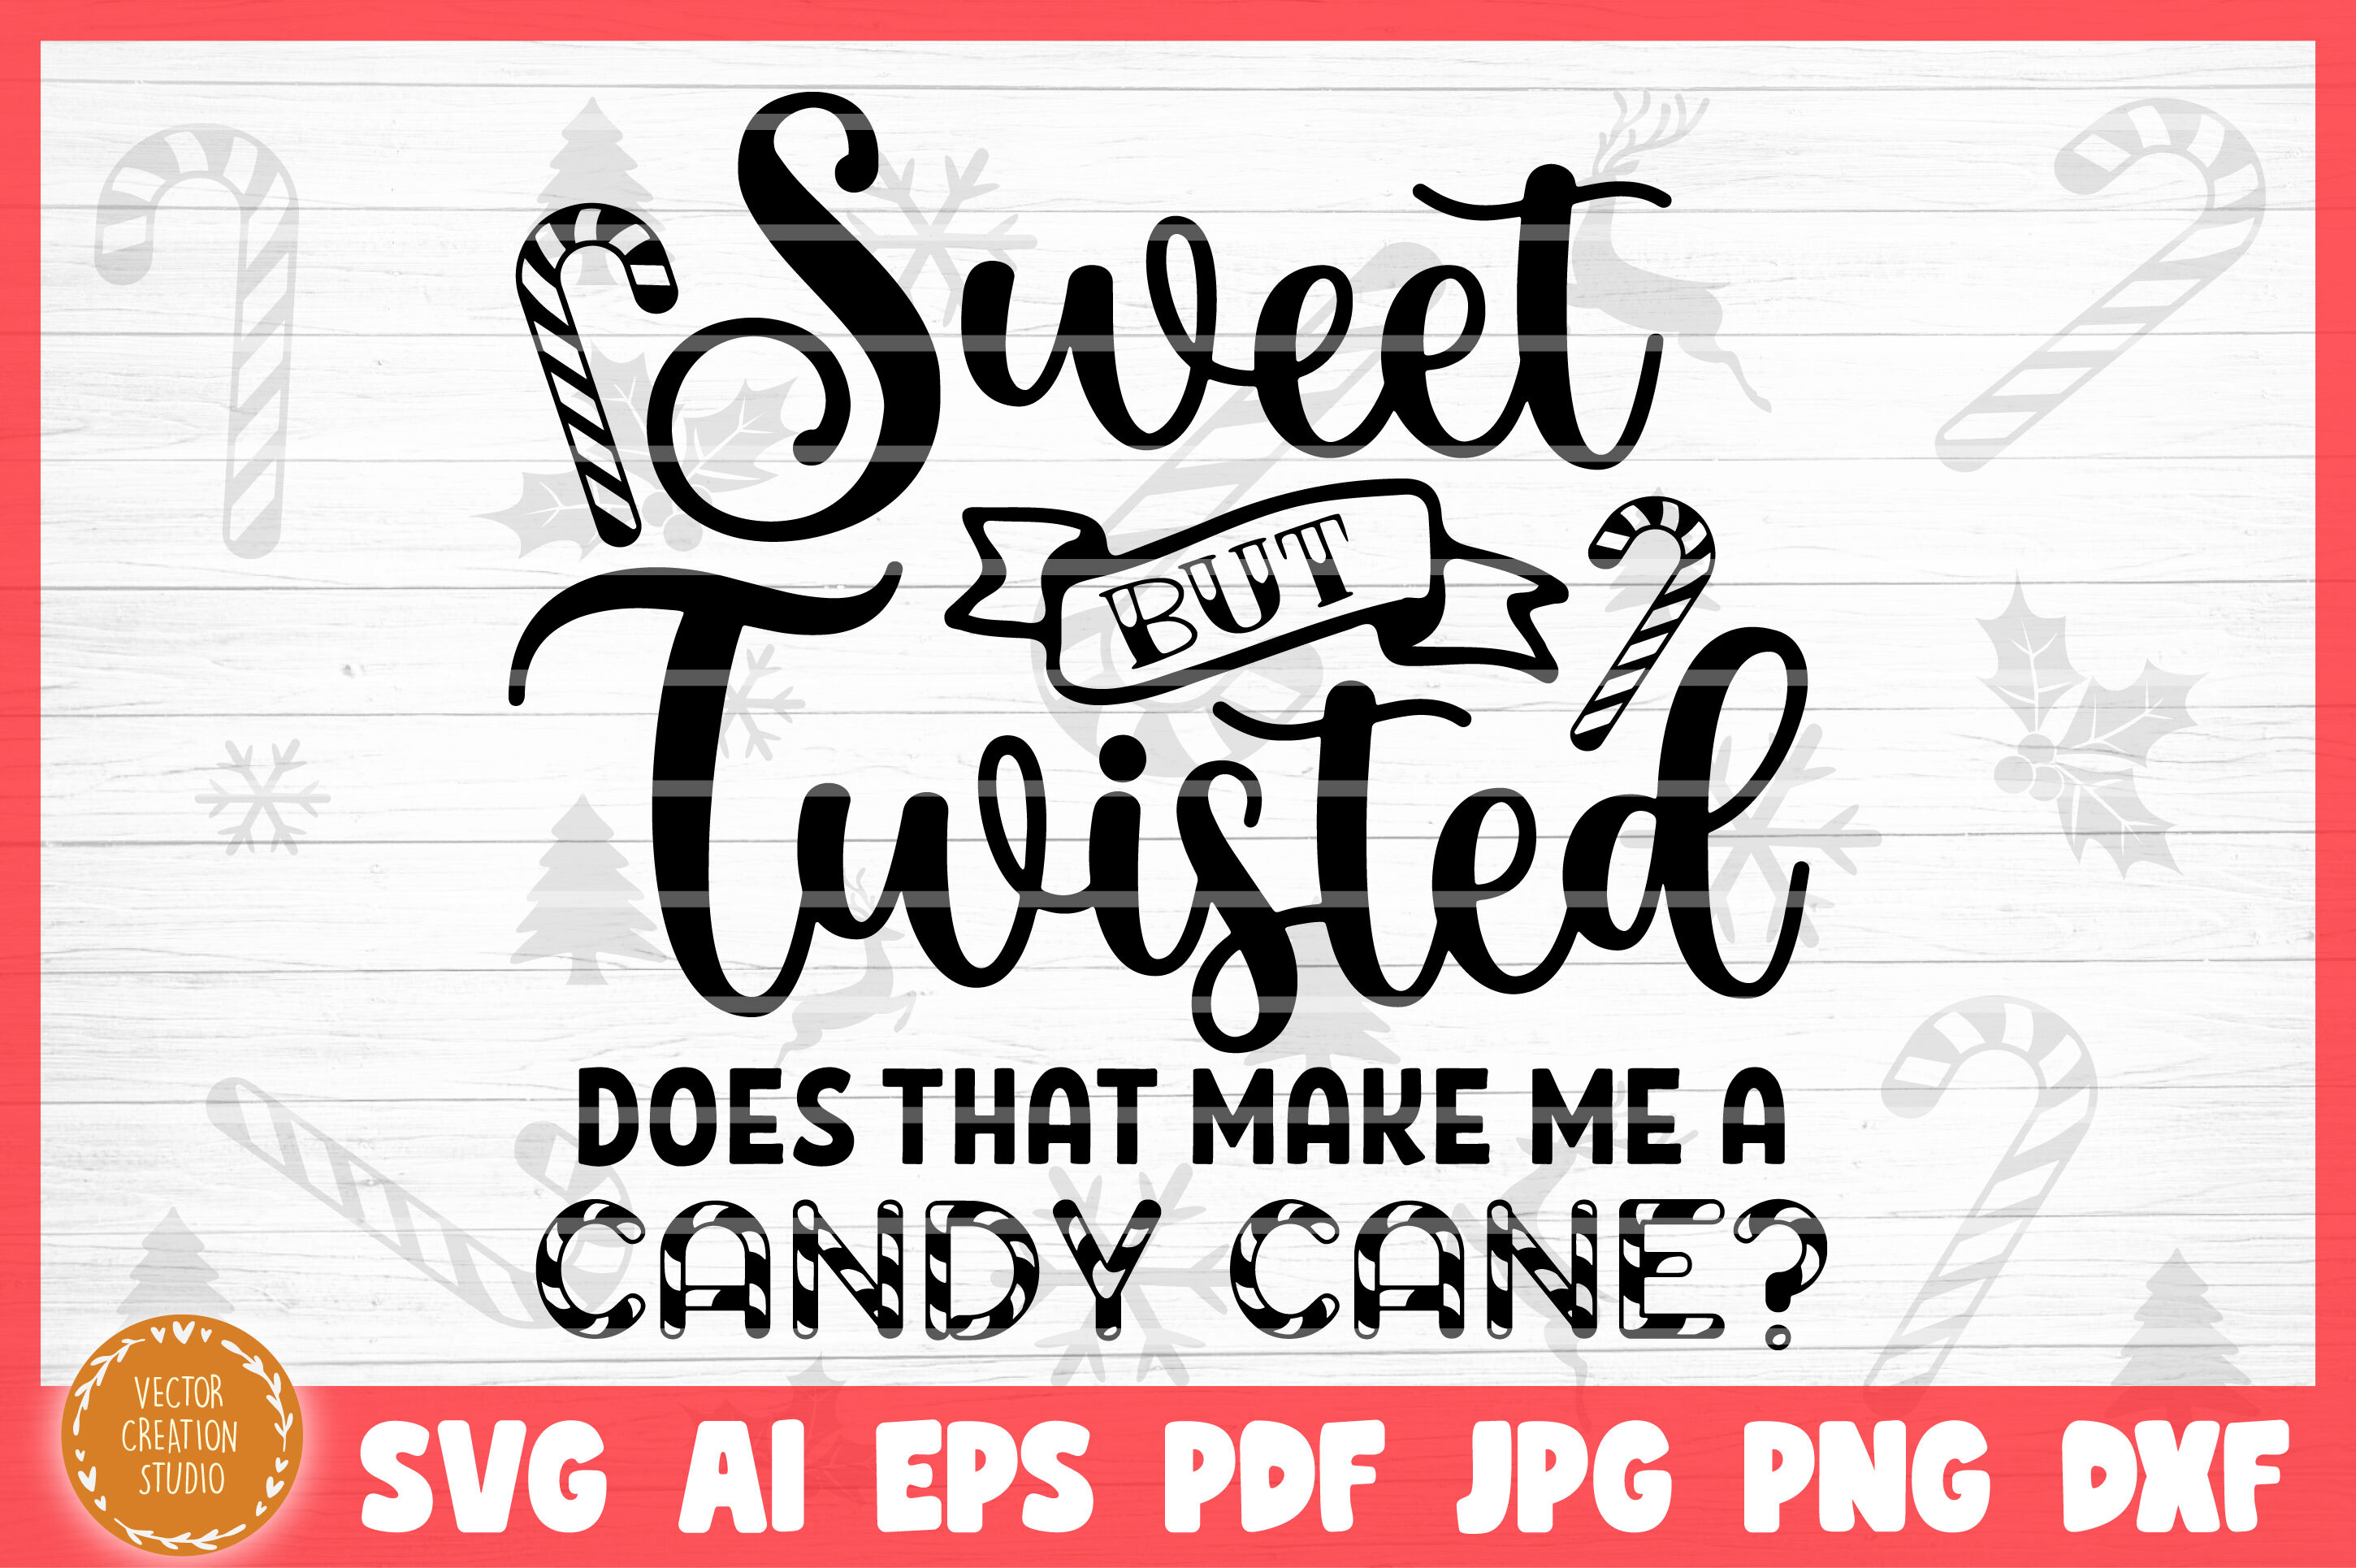 Sweet But Twisted Christmas Svg Cut File By Vectorcreationstudio Thehungryjpeg Com